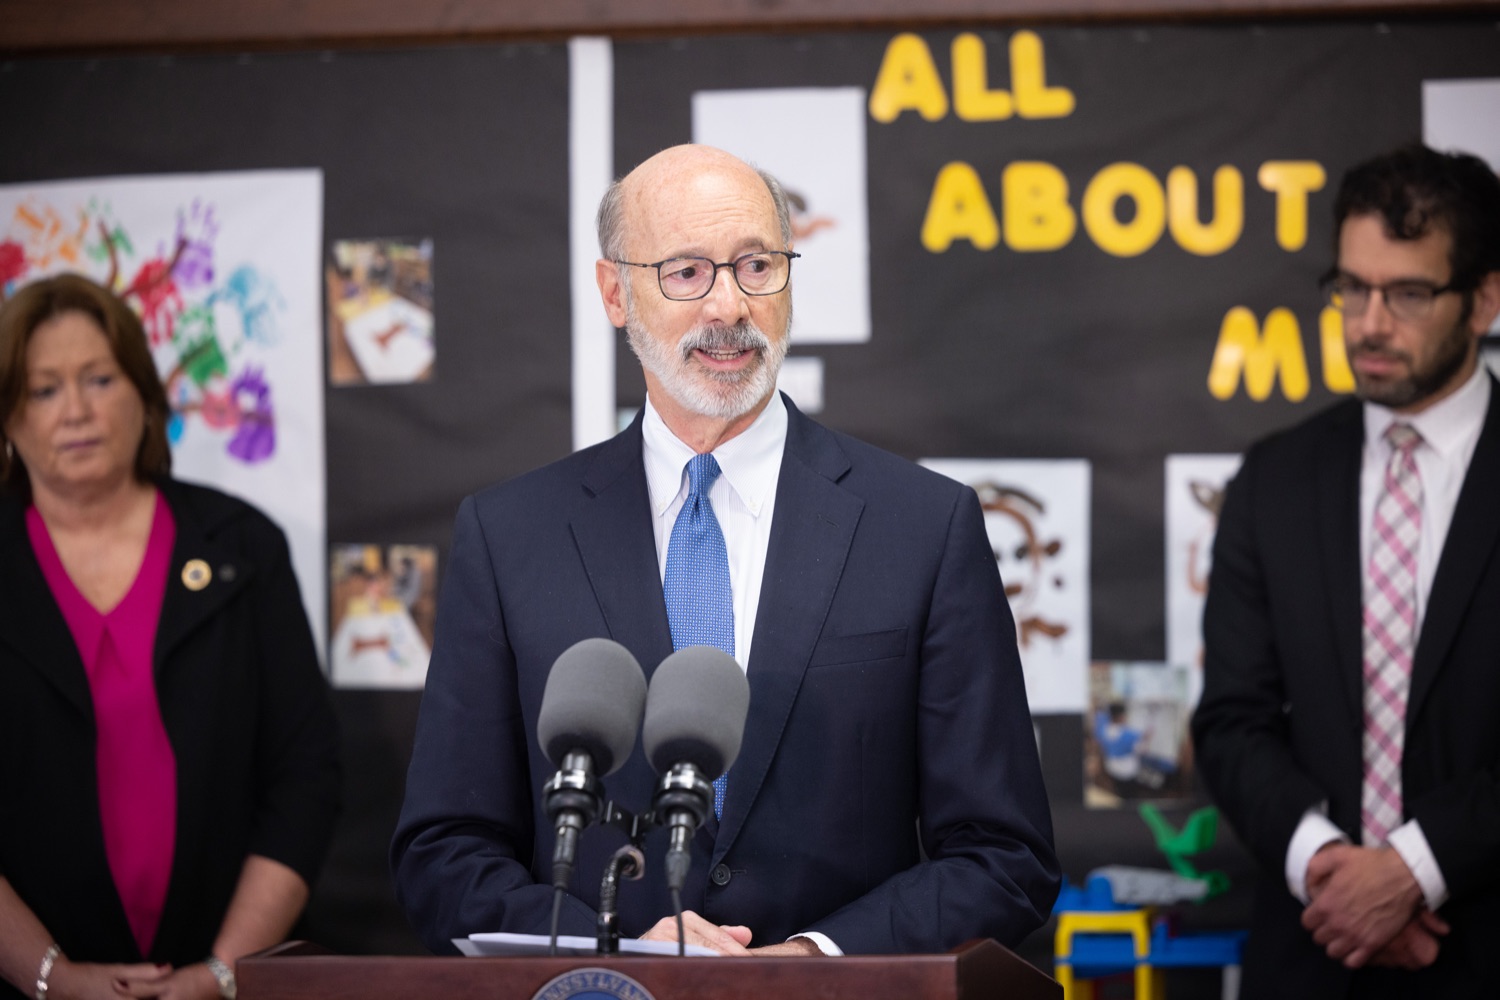 Pennsylvania Governor Tom Wolf speaks with the press.   Governor Tom Wolf joined childhood advocates and state lawmakers to highlight his accomplishments in increased funding for early childhood education during a visit to the Volunteers of America Children's Center in Allentown. In this year's budget alone, the Wolf Administration has secured a $79 million increase in early childhood education, providing more children and families in Pennsylvania with access to high-quality early learning programs through Pennsylvania Pre-K Counts and the Head Start Supplemental Assistance Program (HSSAP).  SEPTEMBER 09, 2022 - ALLENTOWN, PA<br><a href="https://filesource.amperwave.net/commonwealthofpa/photo/22174_gov_preKfunding_dz_019.JPG" target="_blank">⇣ Download Photo</a>